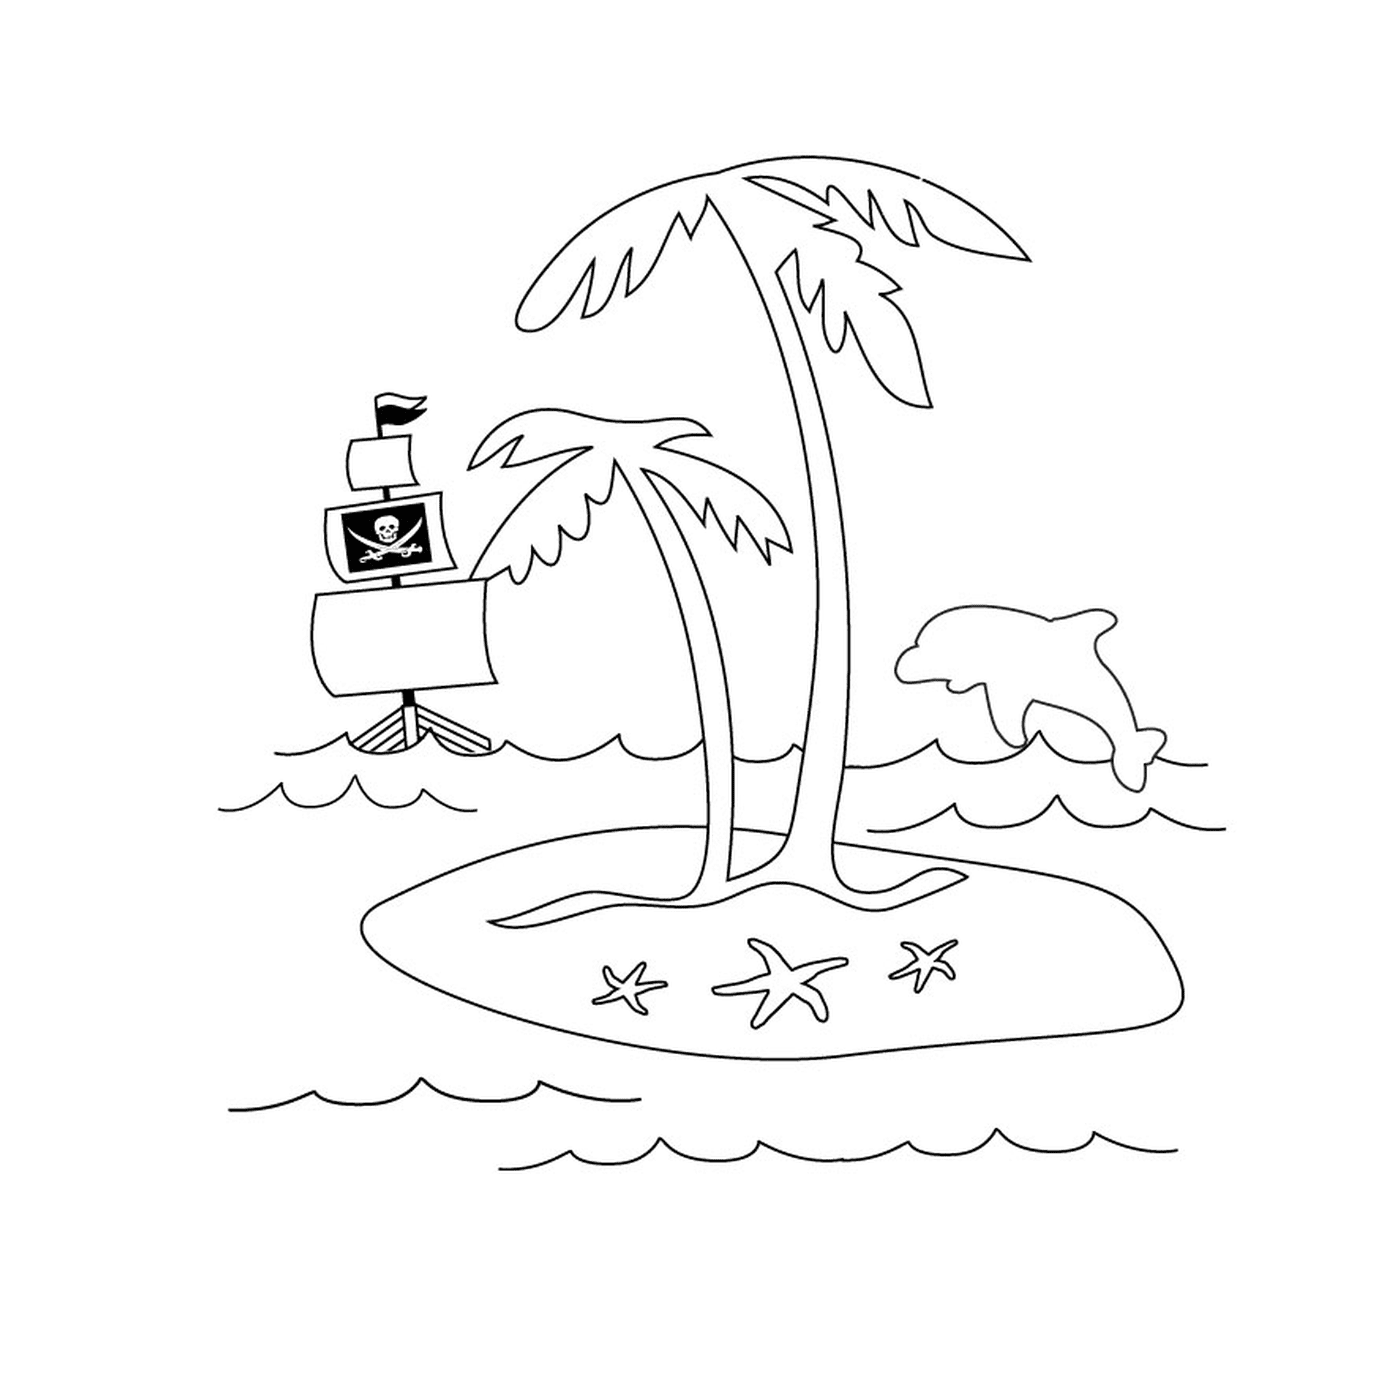  Palm, dolphin and boat 